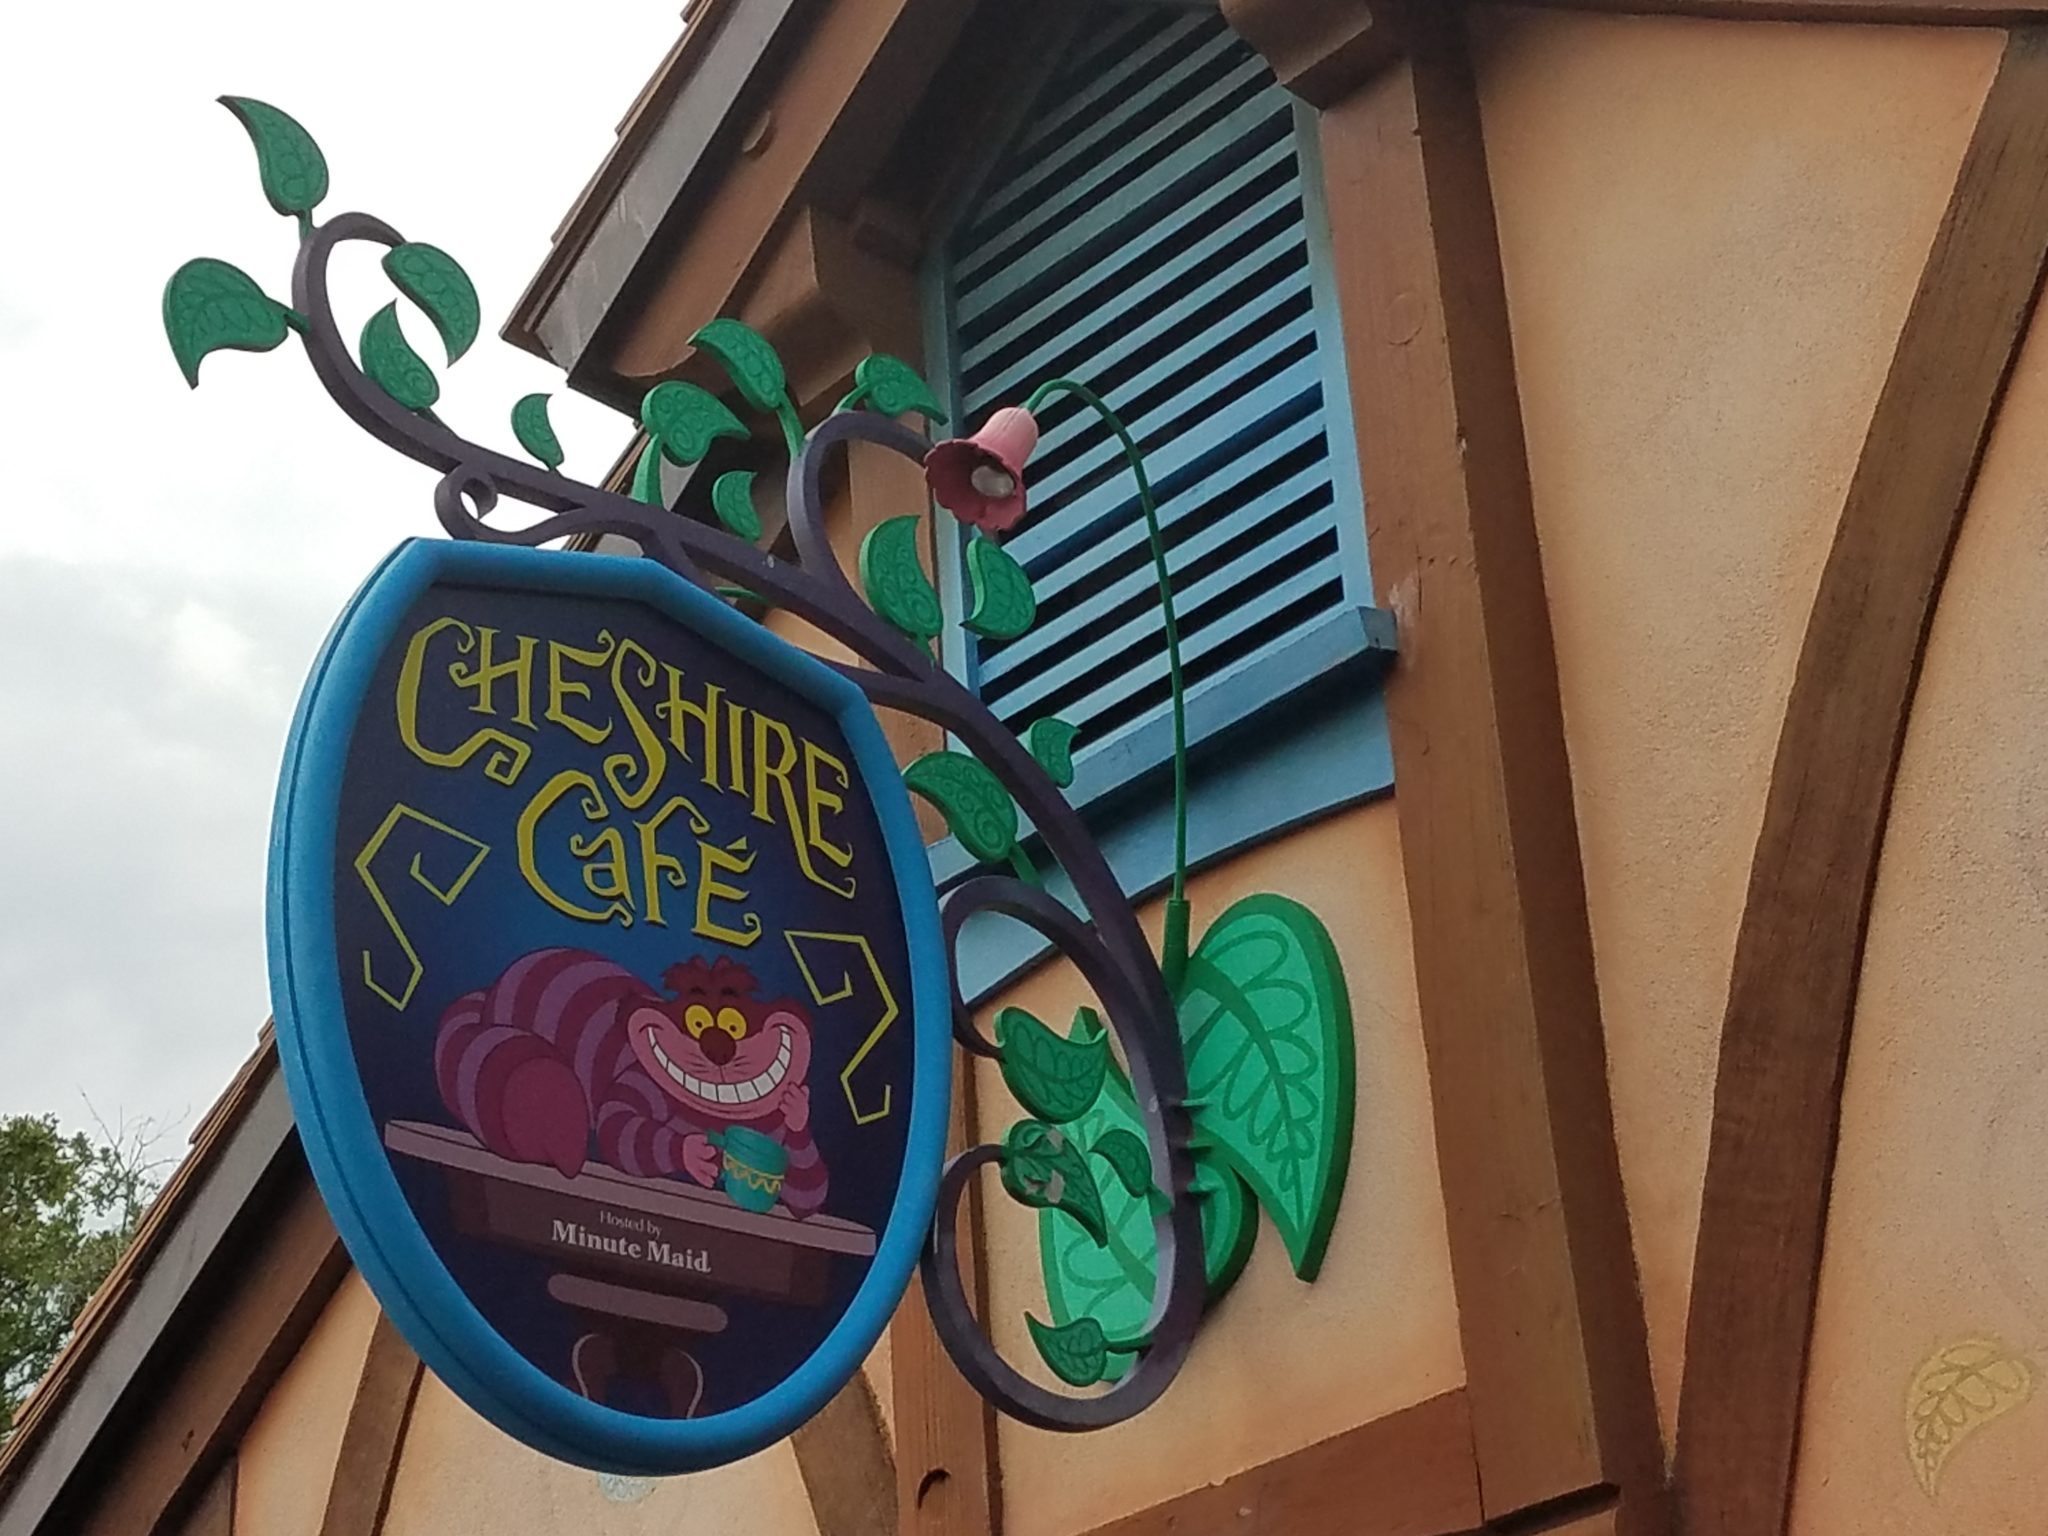 Pull the Cheshire Cat Tail and Drink Cold Brew Coffee at Cheshire Cafe